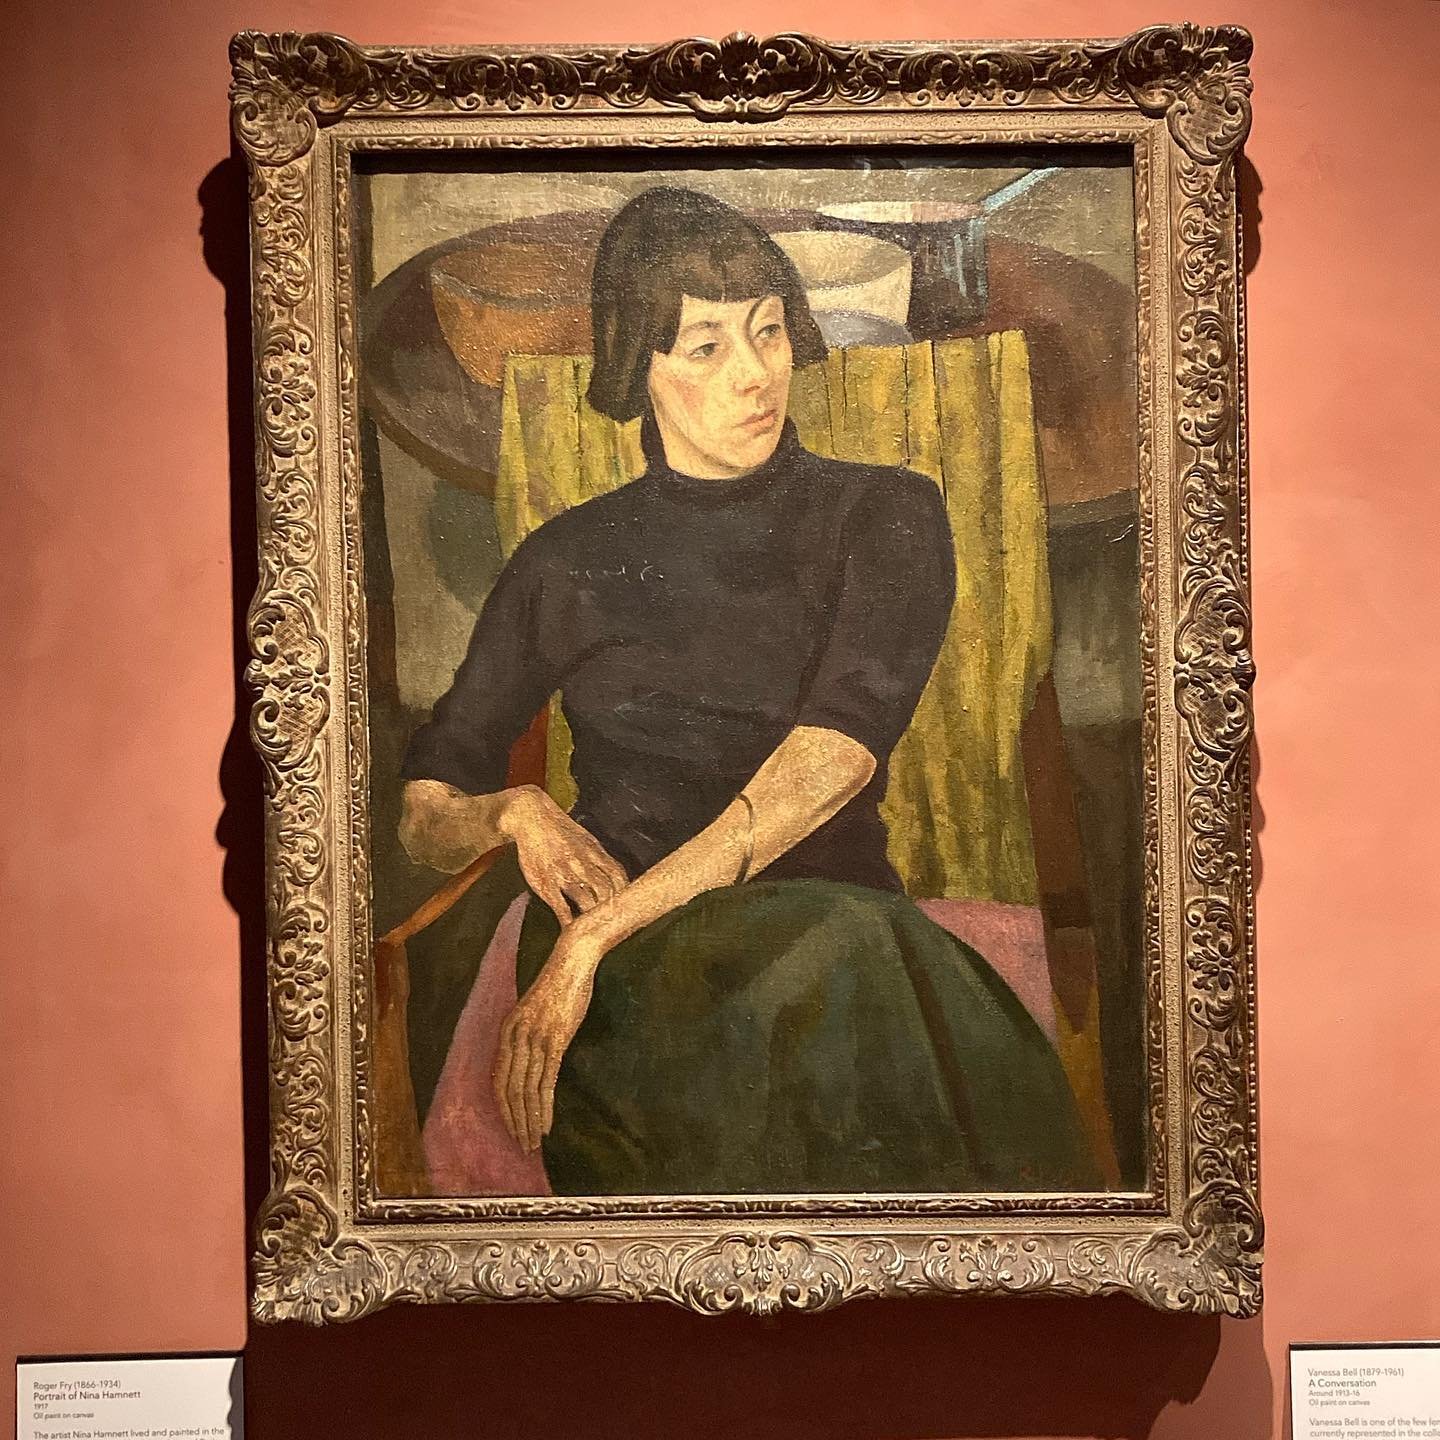 Portraits at the Courtauld by Roger Fry, Paul Cezanne, Frank Auerbach.